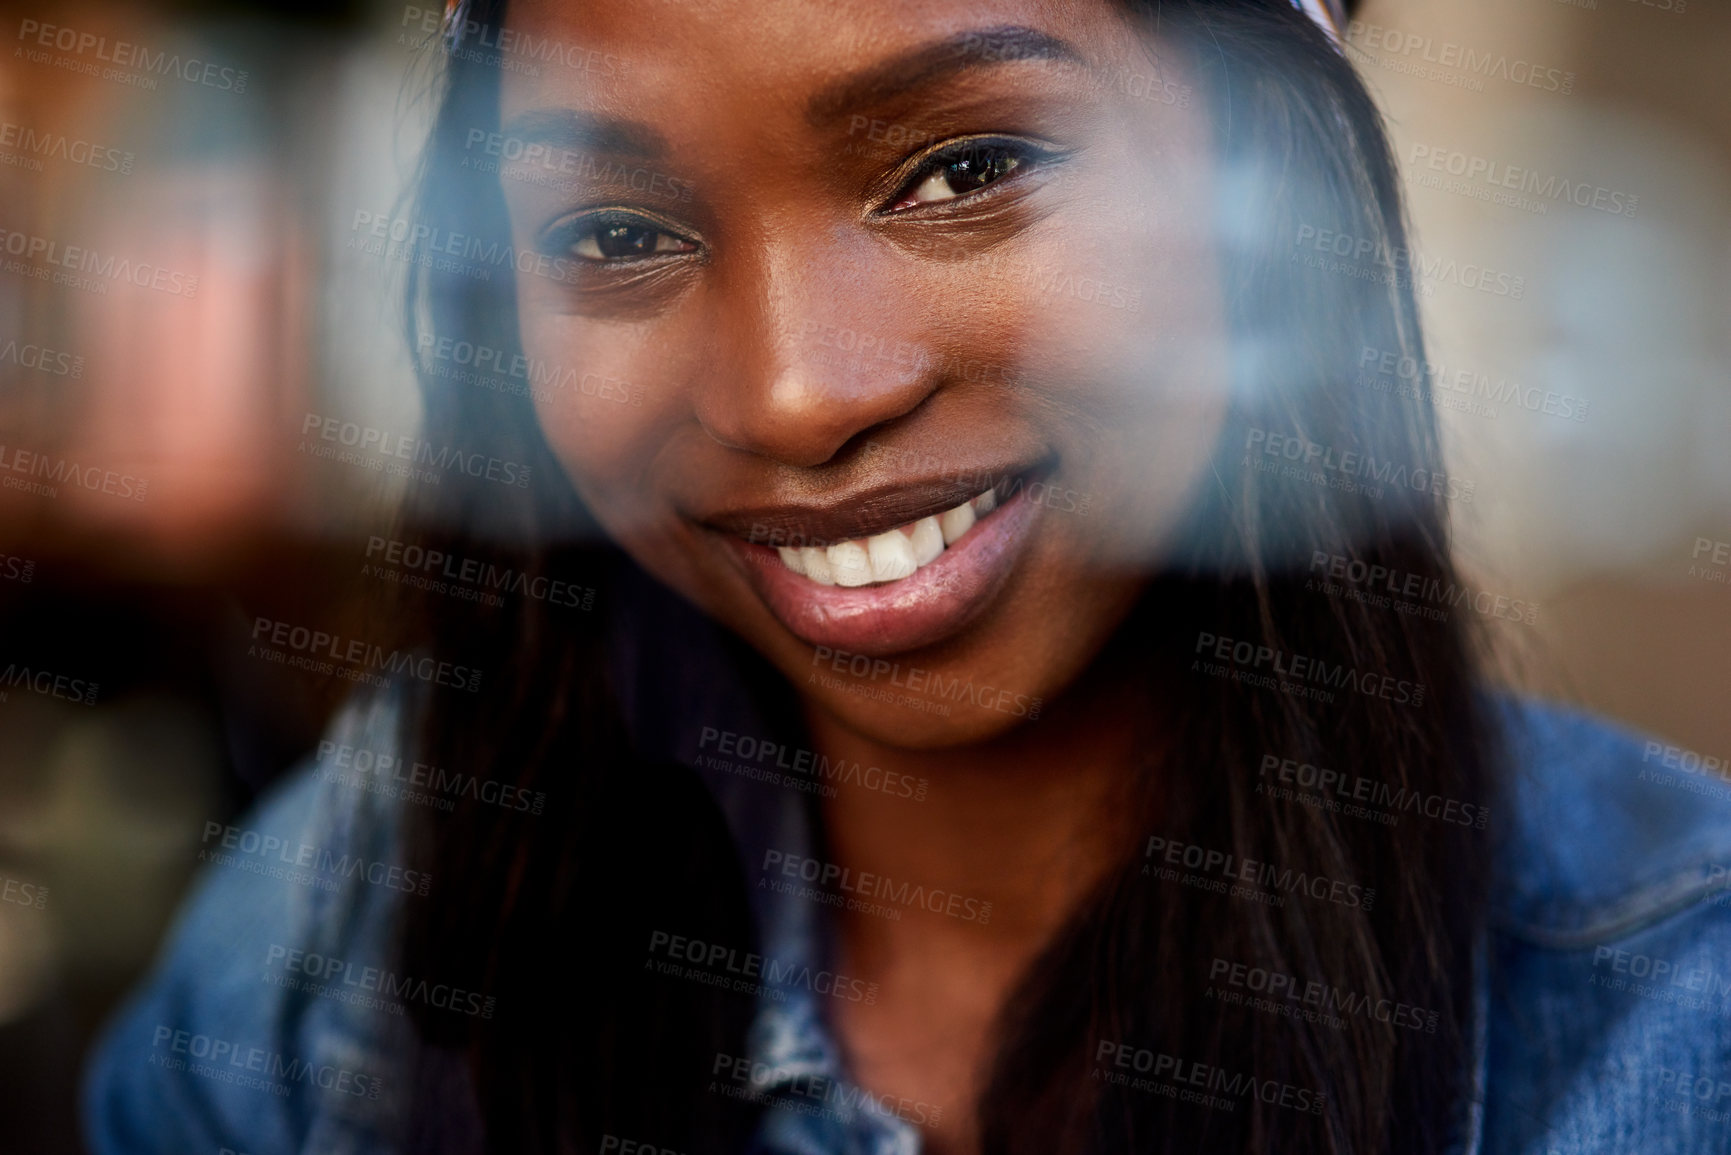 Buy stock photo Closeup portrait of an attractive young woman captured through a glass window inside a cafe